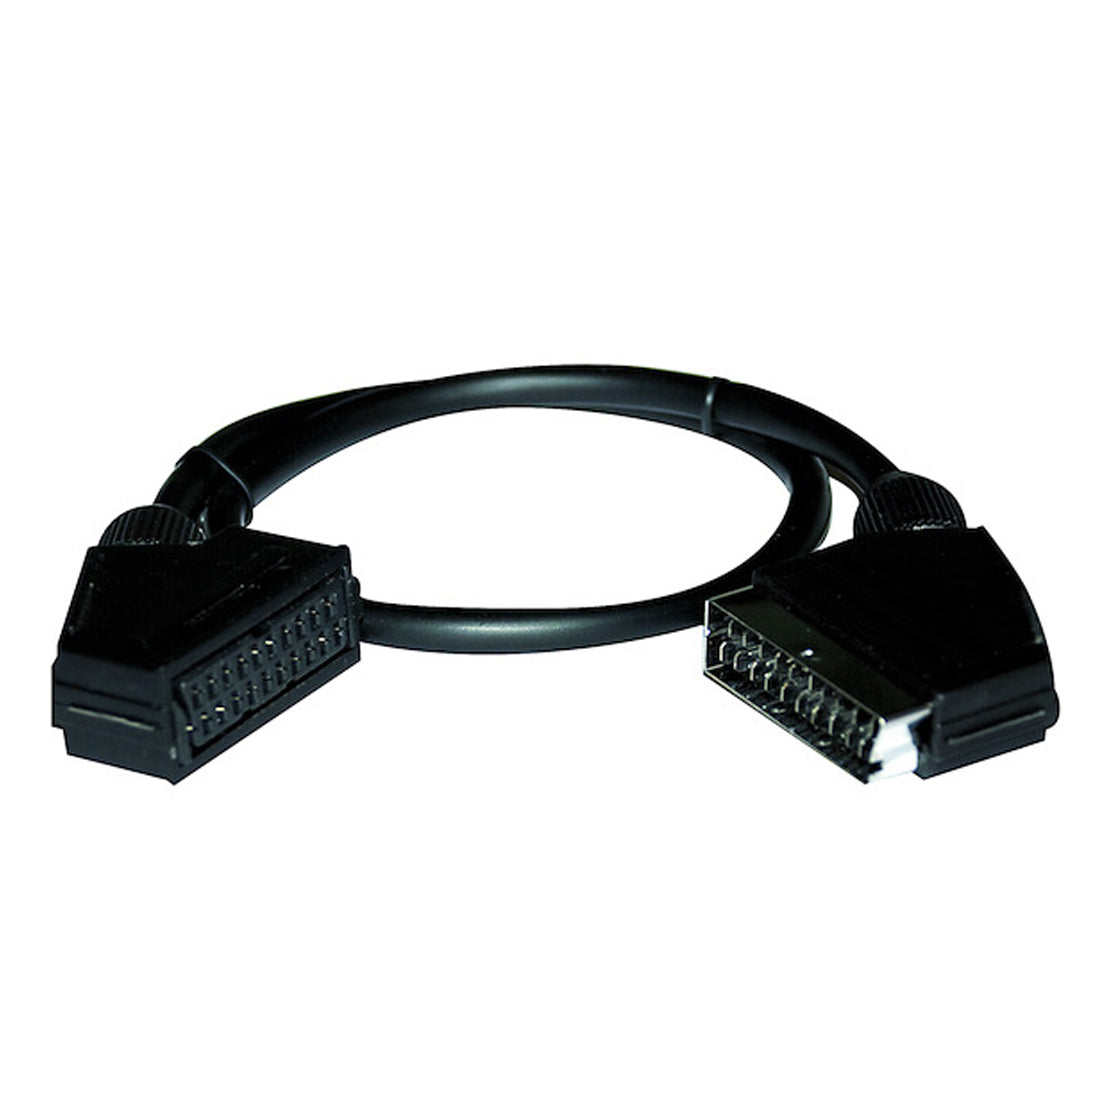 Life Audio Video scart cable, 21-pole cable 0.6 m, scart socket for TV, Ø cable 7mm, audio video cable